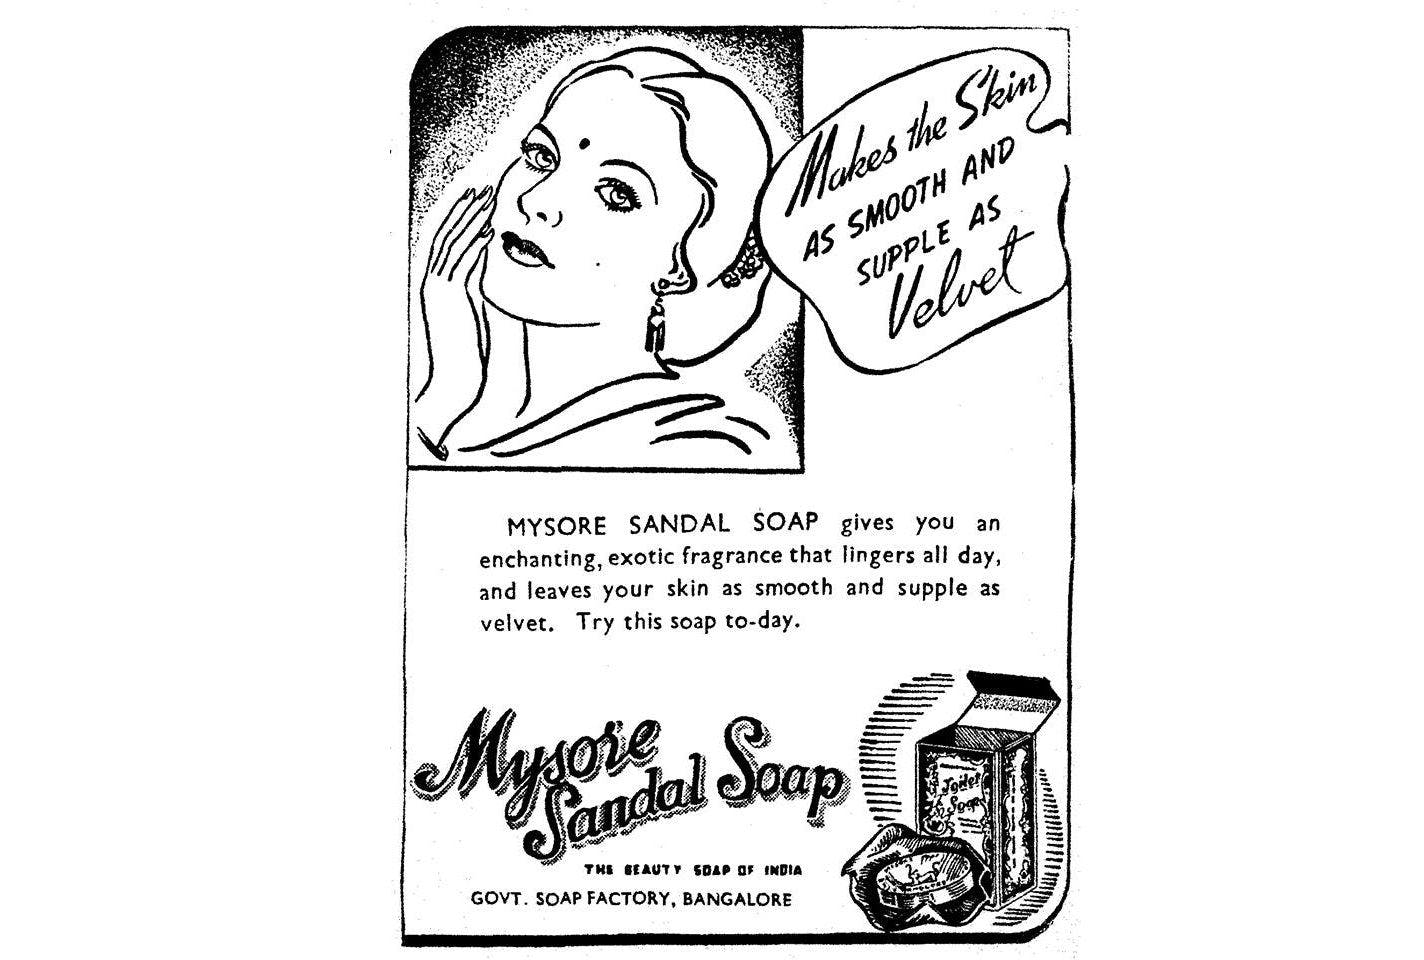 An early advertisement for the Mysore Sandal Soap